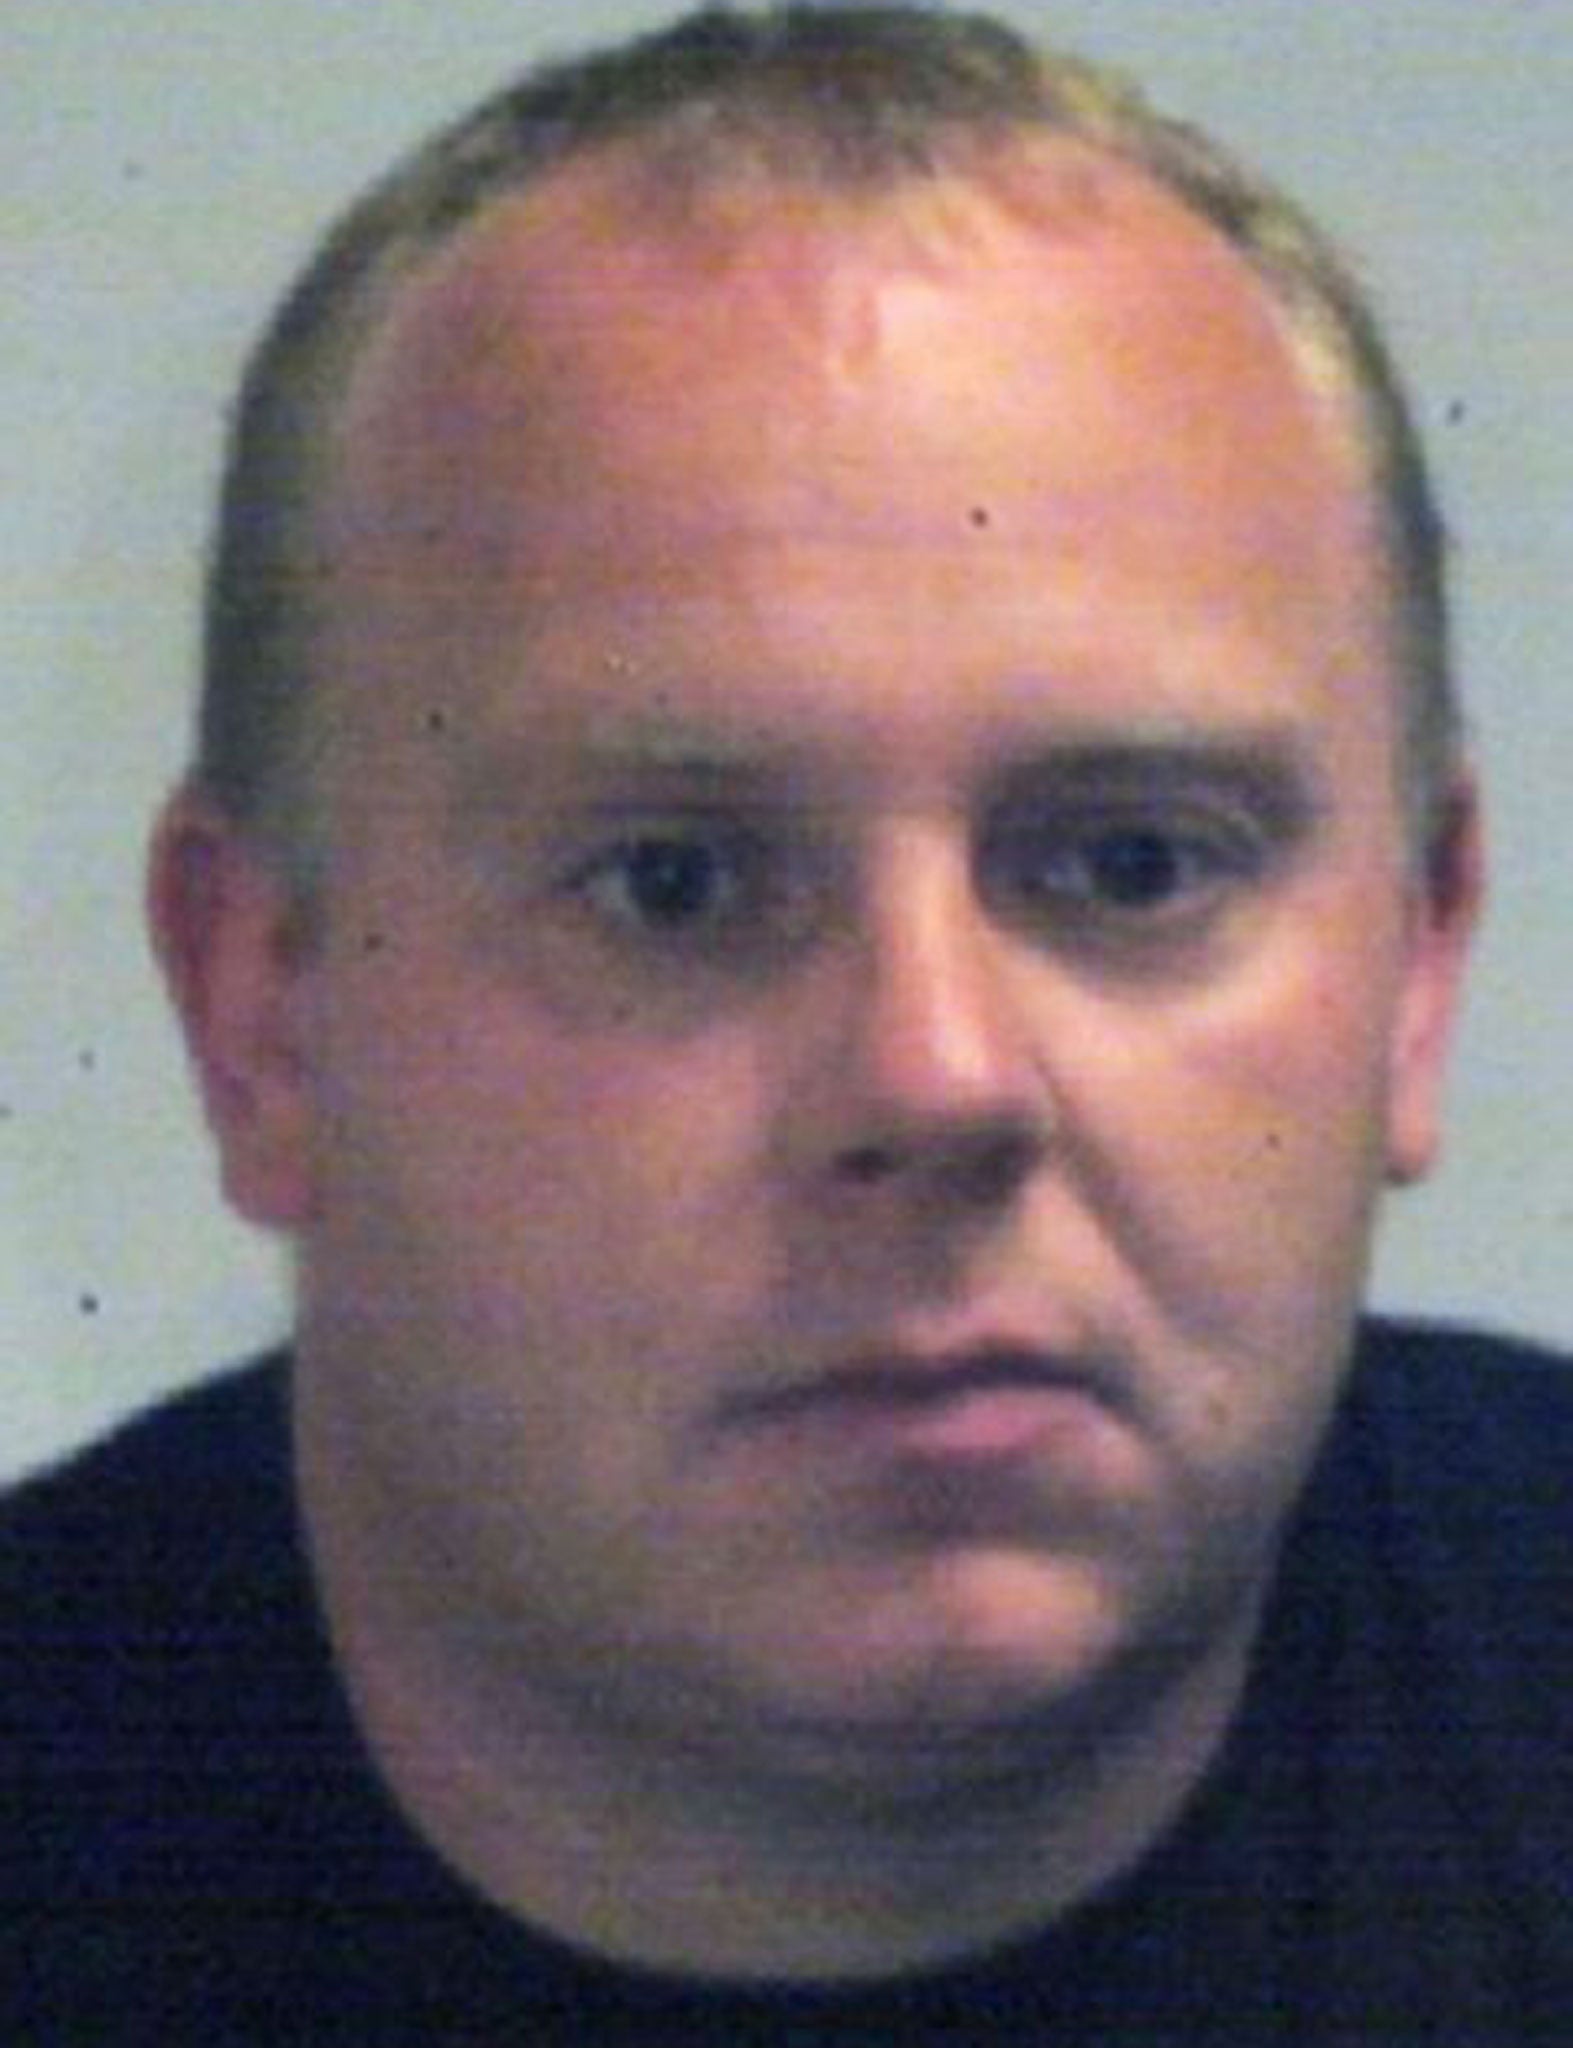 John Bush will appear again at Sheffield Crown Court in September